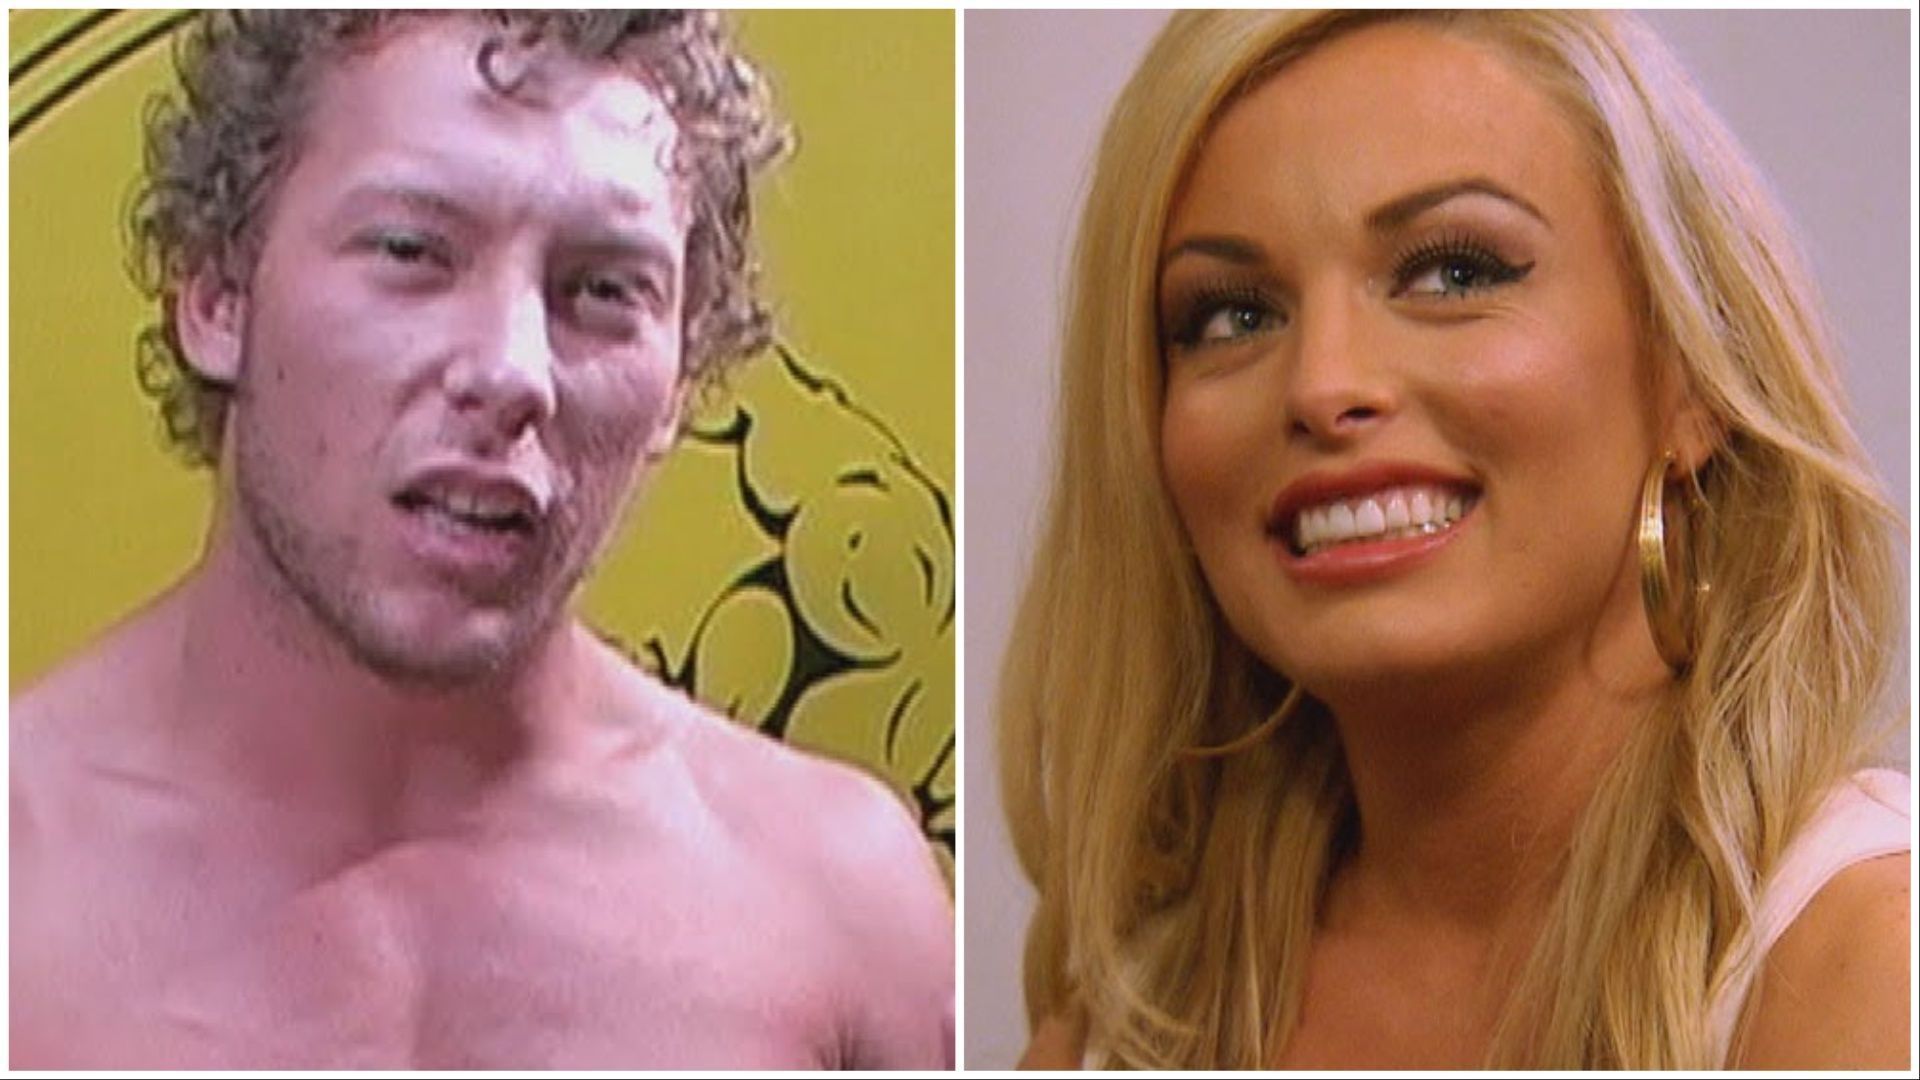 AEW star Kenny Omega and former WWE Superstar Mandy Rose